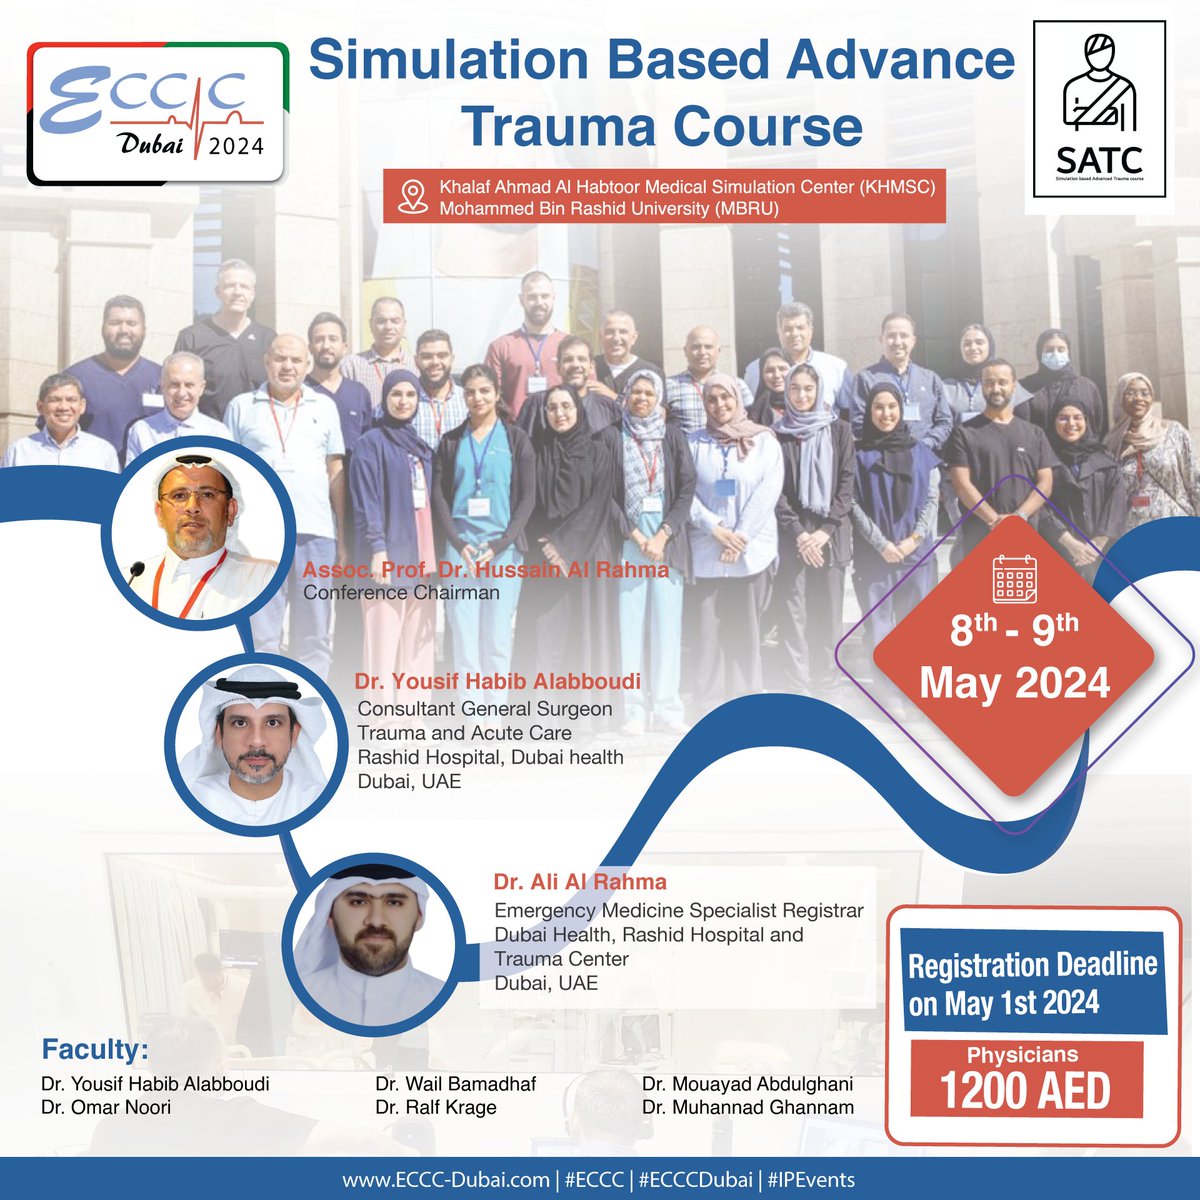 Hurry! Tomorrow, May 1st, 2024, is the deadline to register for the Pre-Conference Simulation-Based Advanced Trauma Course at Emirates Critical Care Conference 2024!

Reg now @ bit.ly/ECCCSAT

#ECCC #ECCCDUBAI #ECCC2024